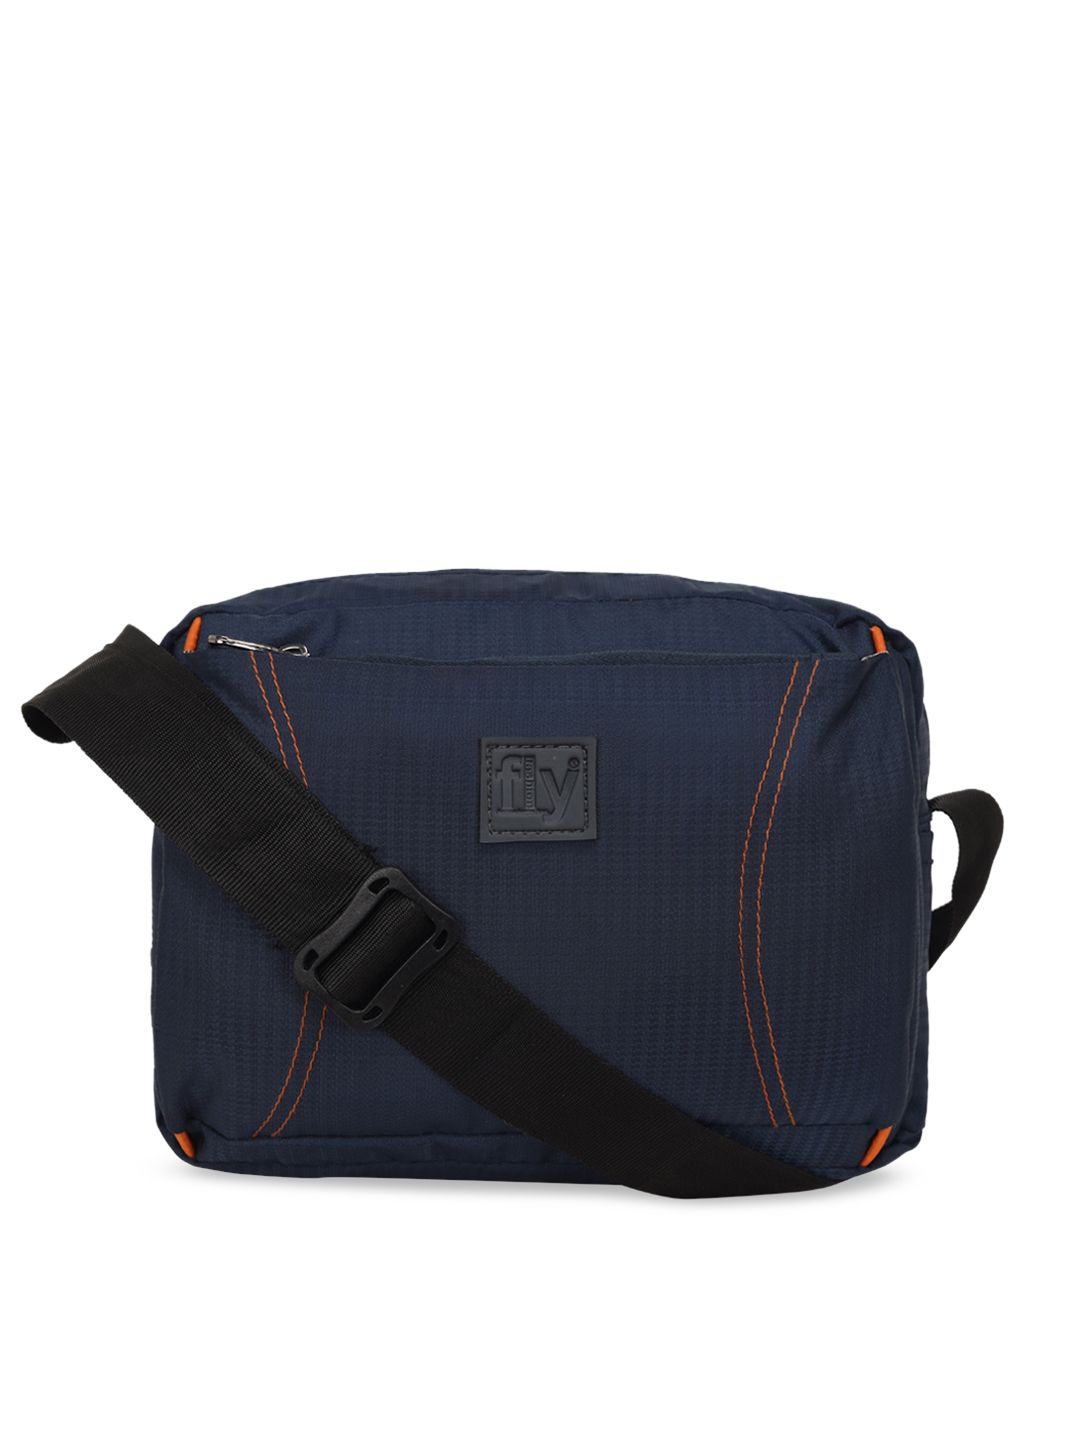 Fly Fashion Unisex Navy Blue Self Design Travel Sling Bag Price in India